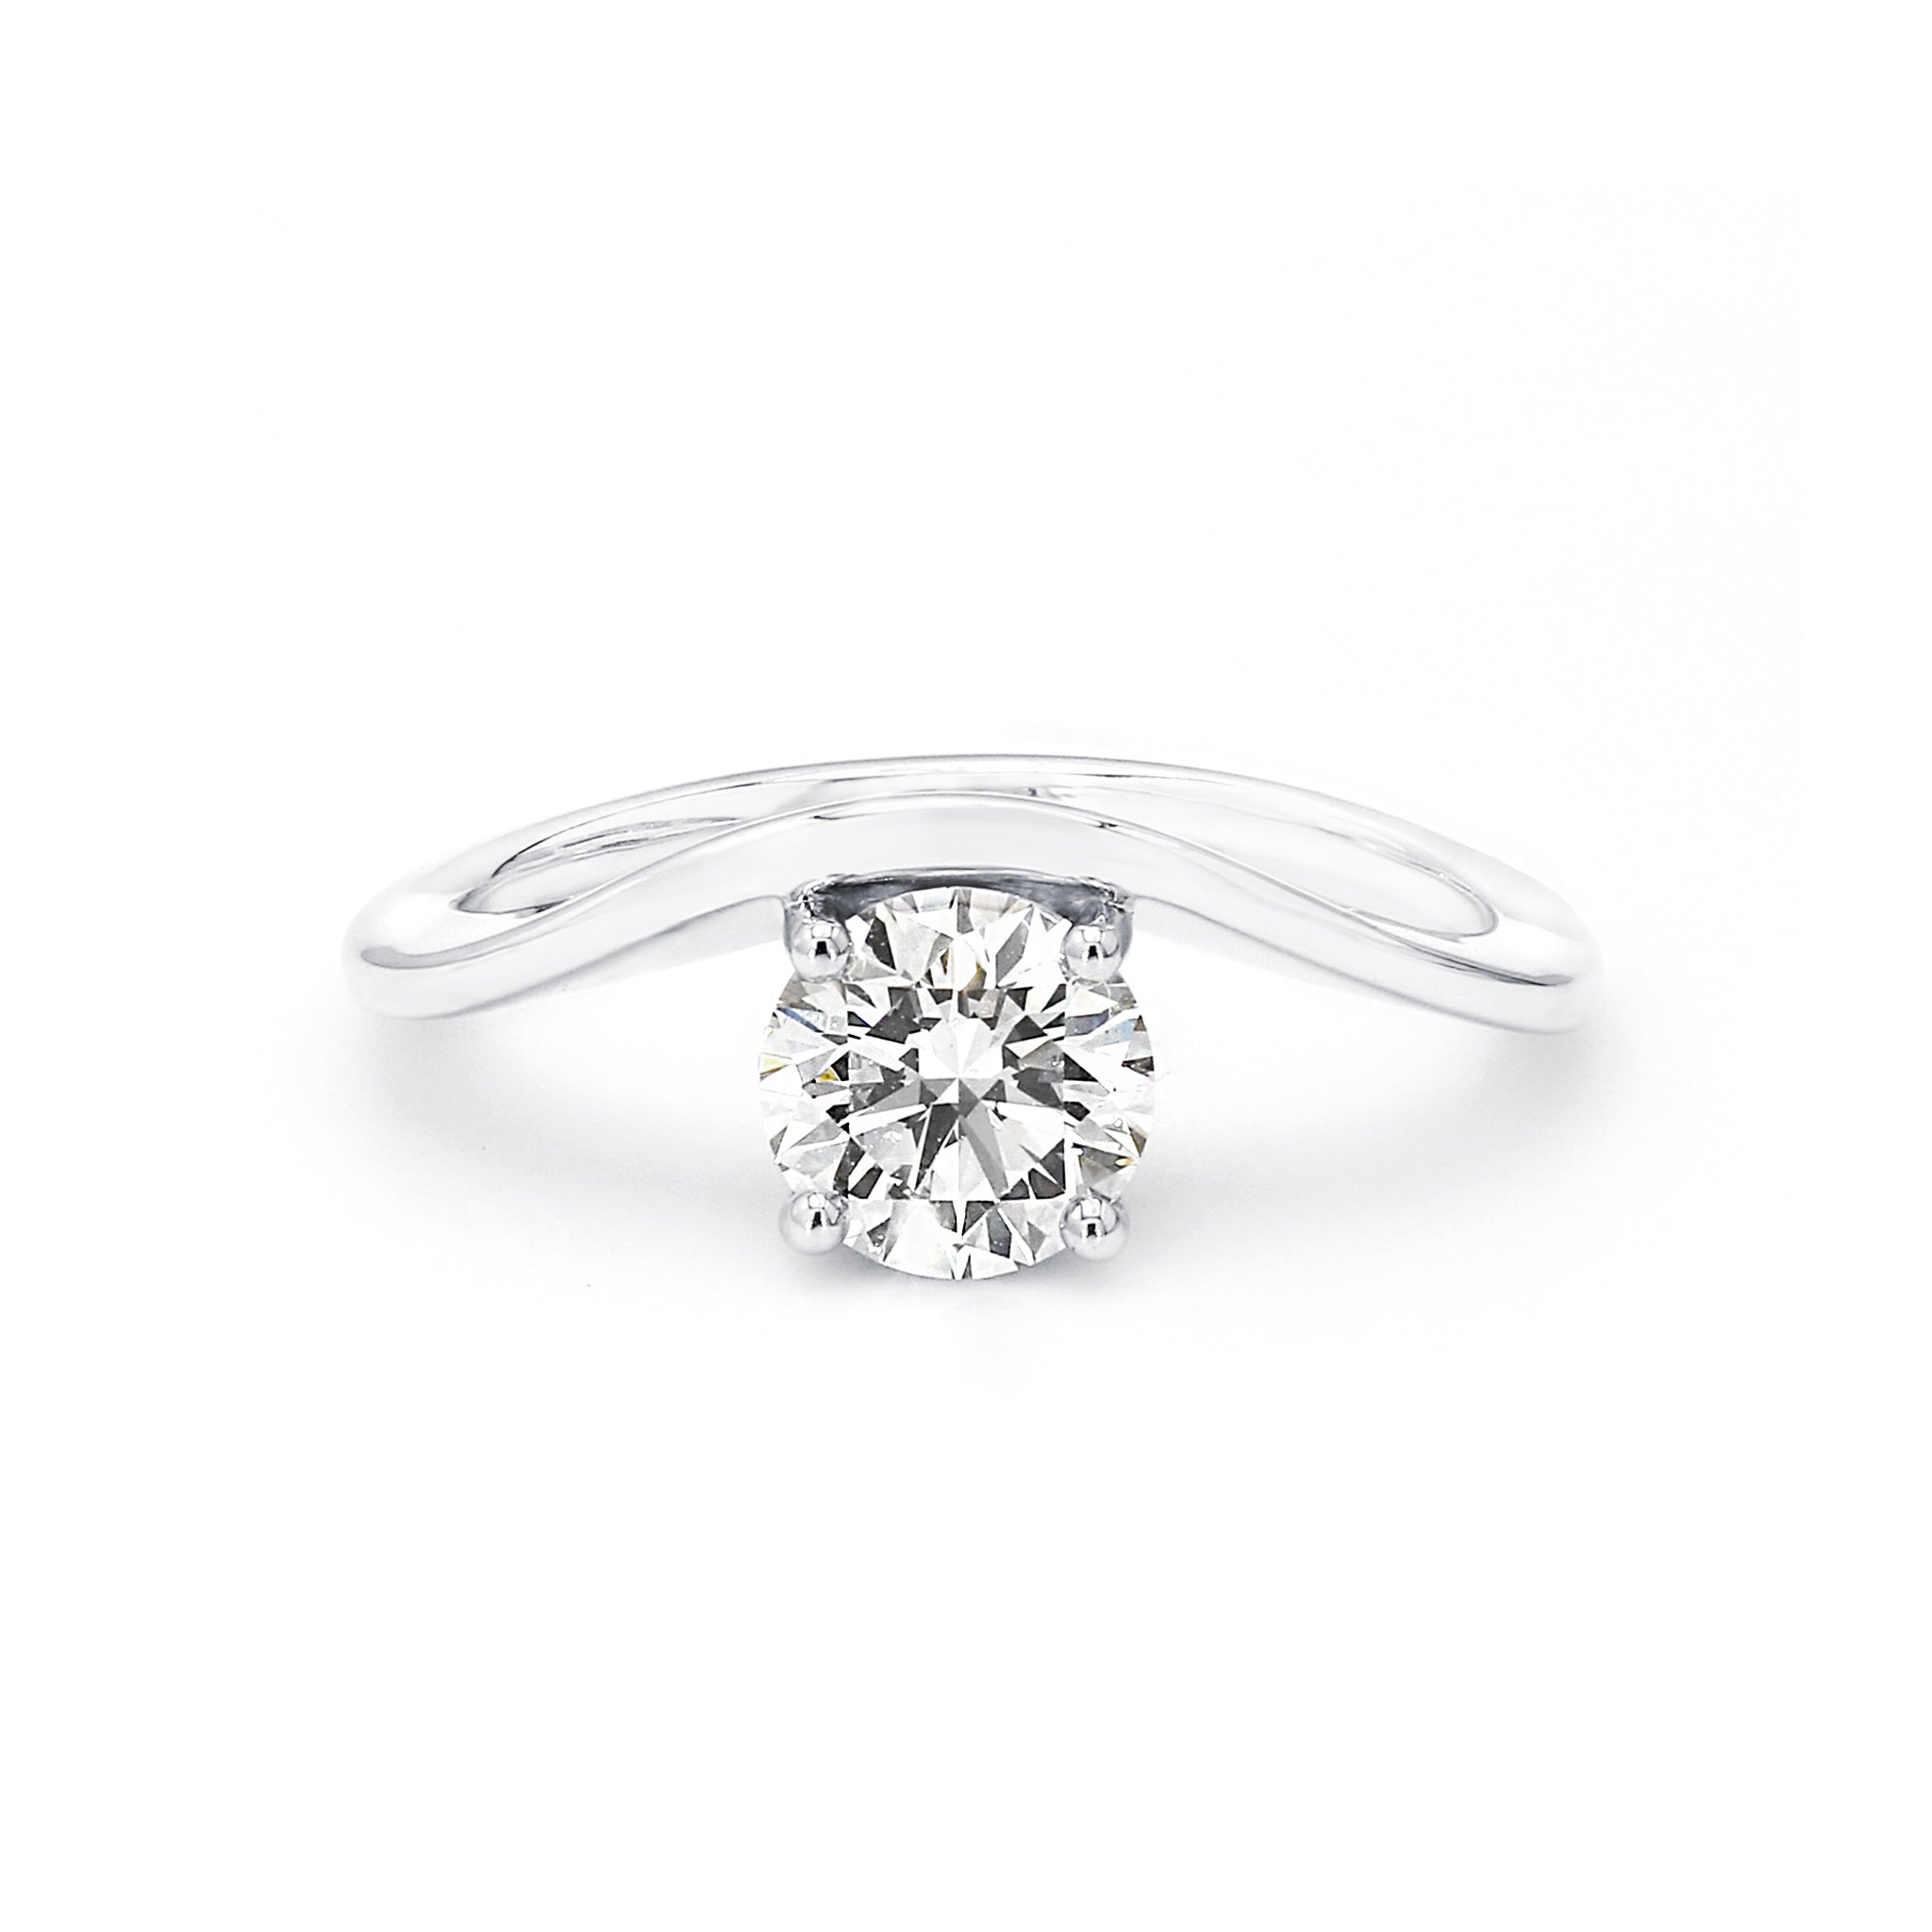 Shimansky - Silhouette Diamond Engagement Ring 1.00ct Crafted in 18K White Gold